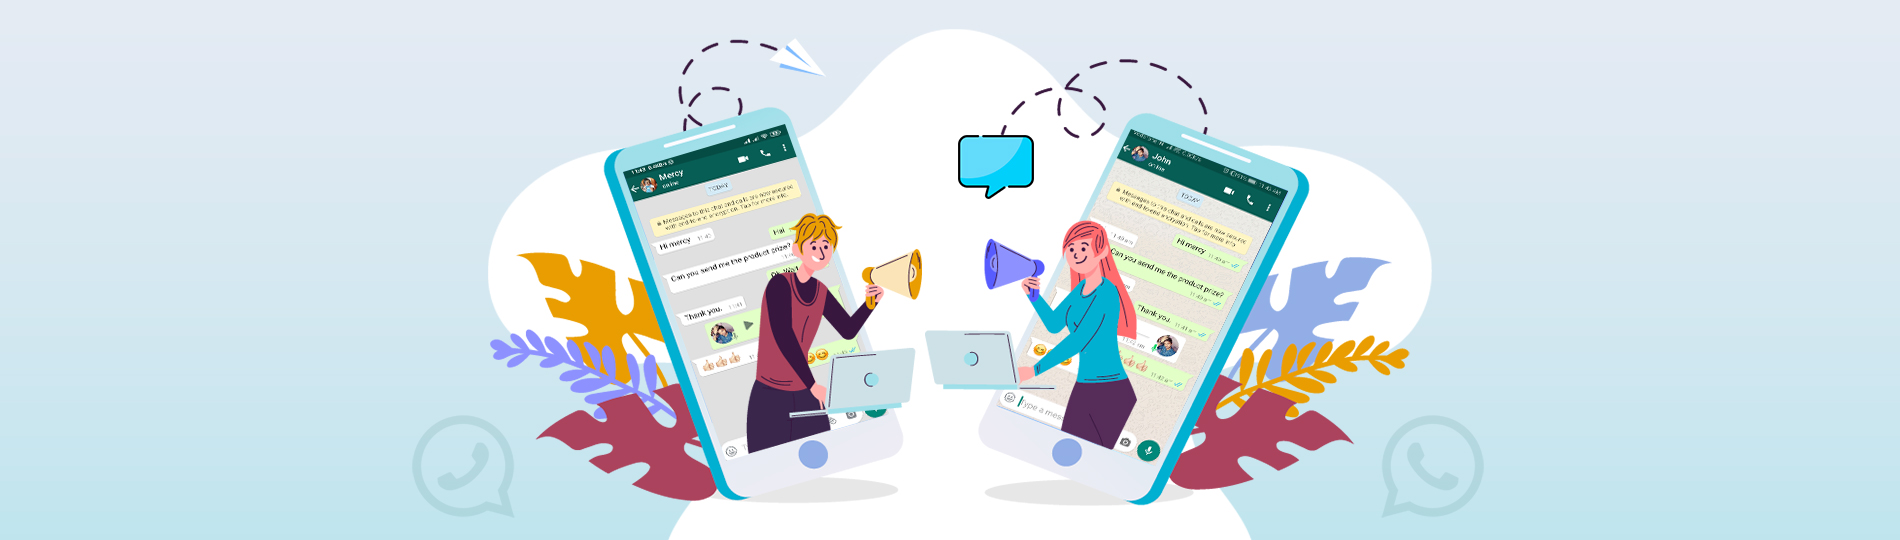 Whatsapp clone app for online communication business